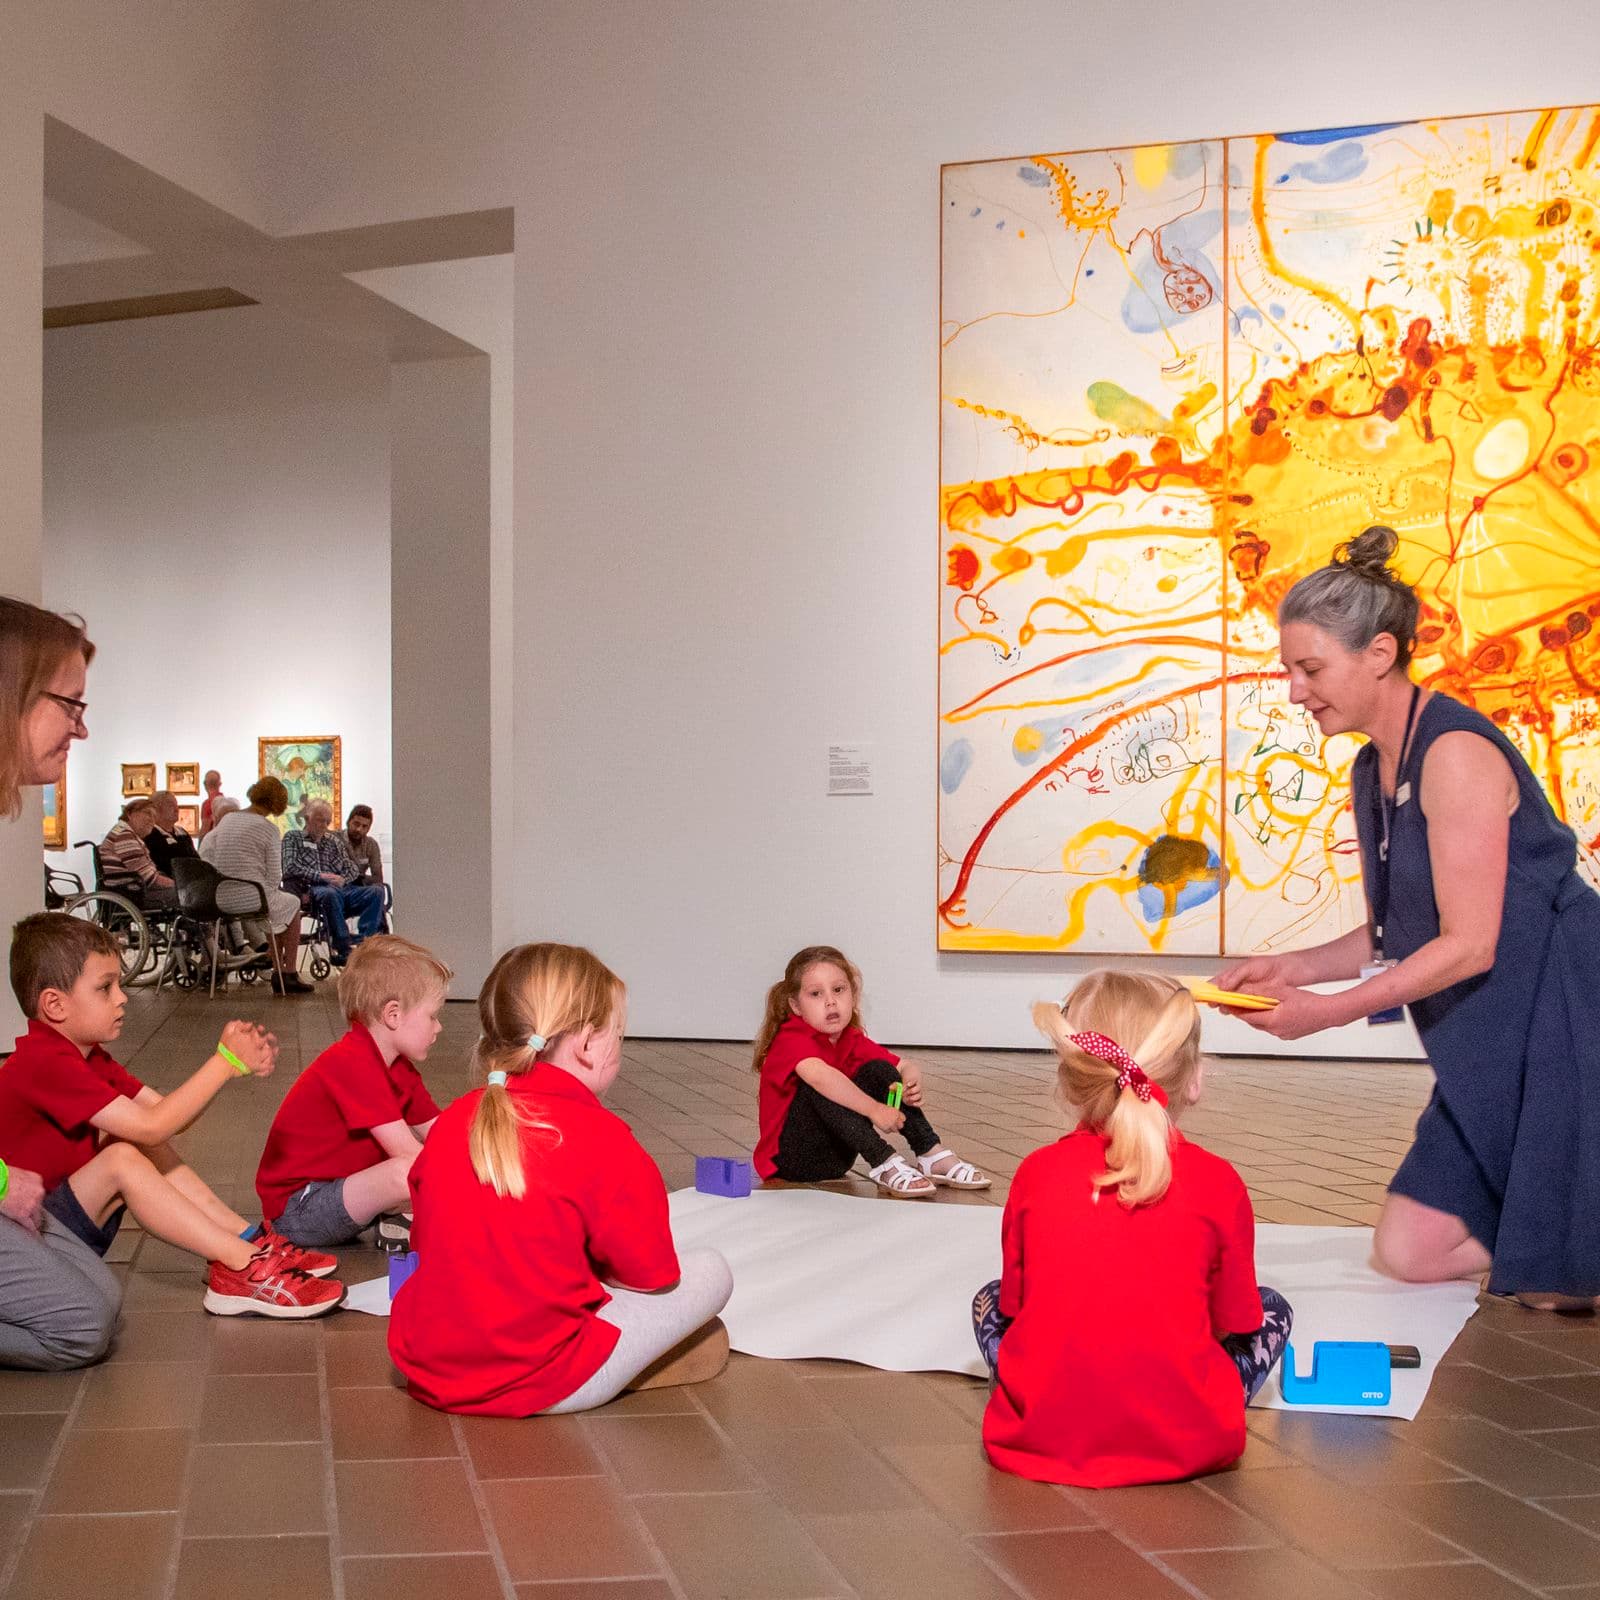 A group of primary school children and their teachers sit on the gallery floor and work together on an artwork